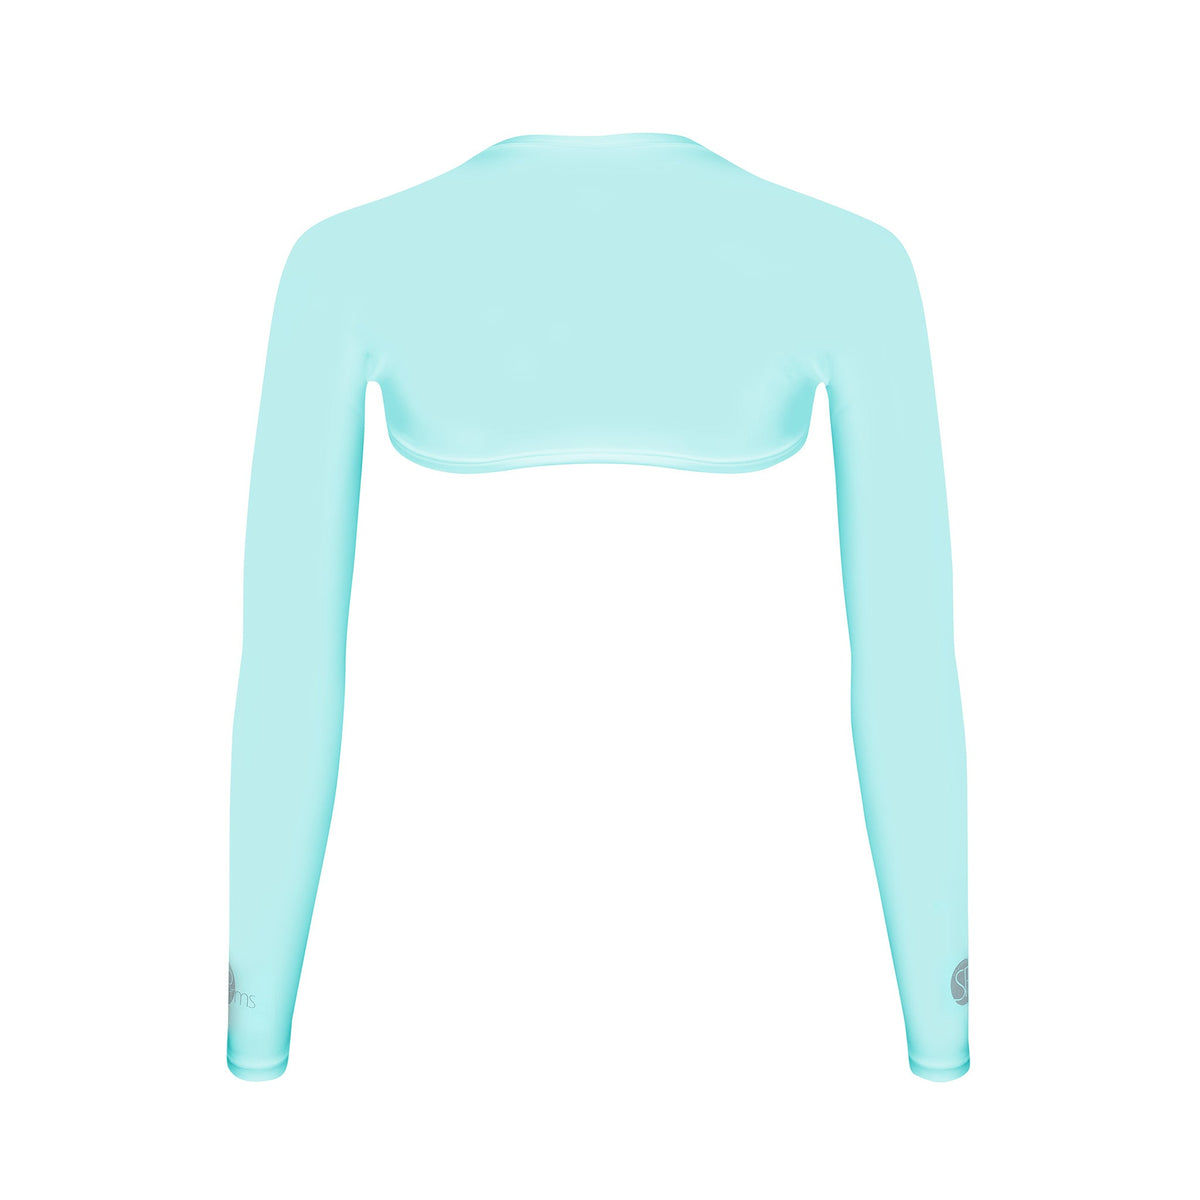 SP Arms - Shoulder Wrap (UV sleeves) [Mint] - SParms